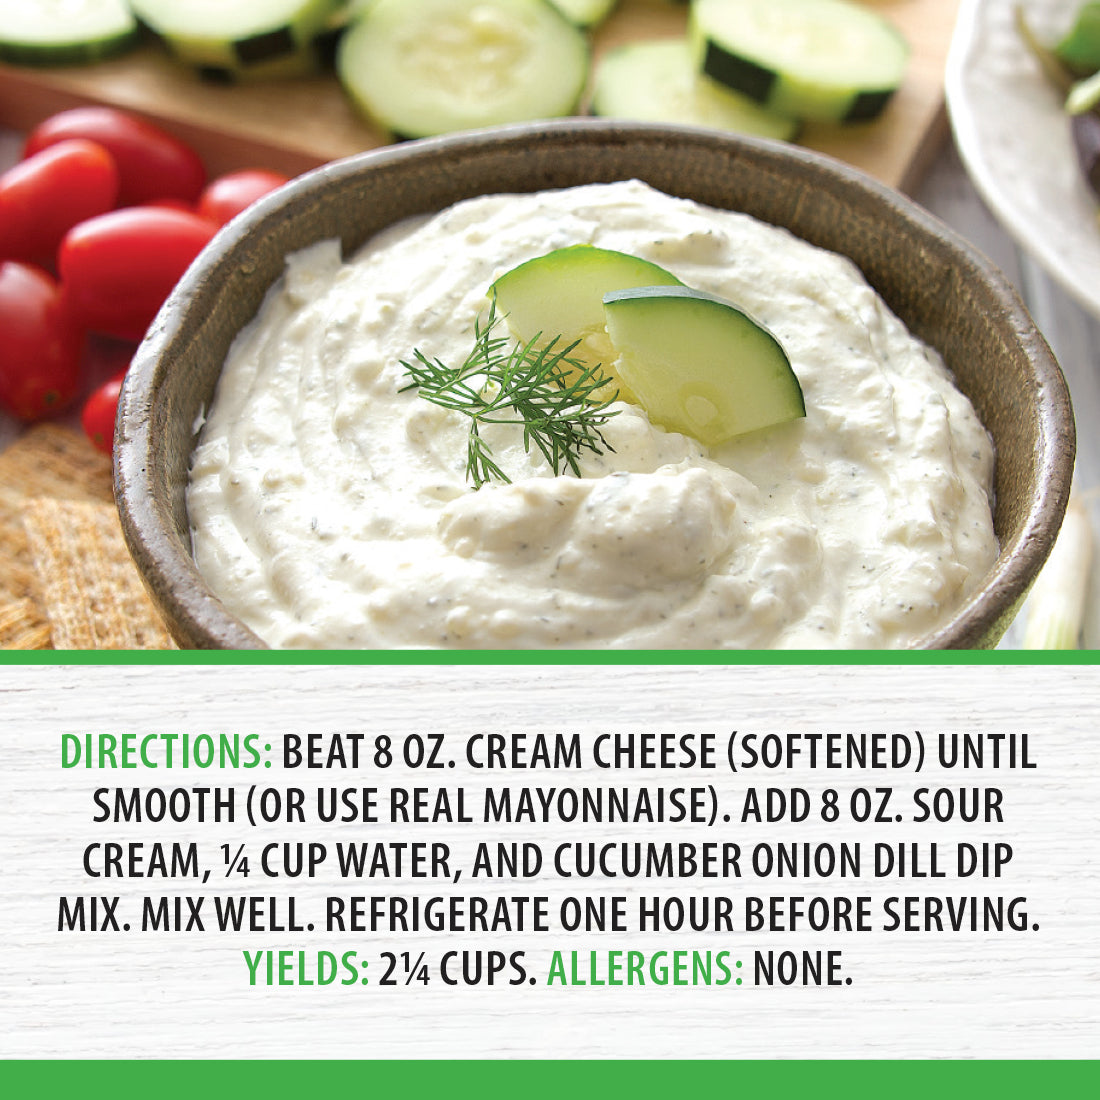 Cucumber Onion Dill Dip mixed with sour cream and served with crackers and veggies. 